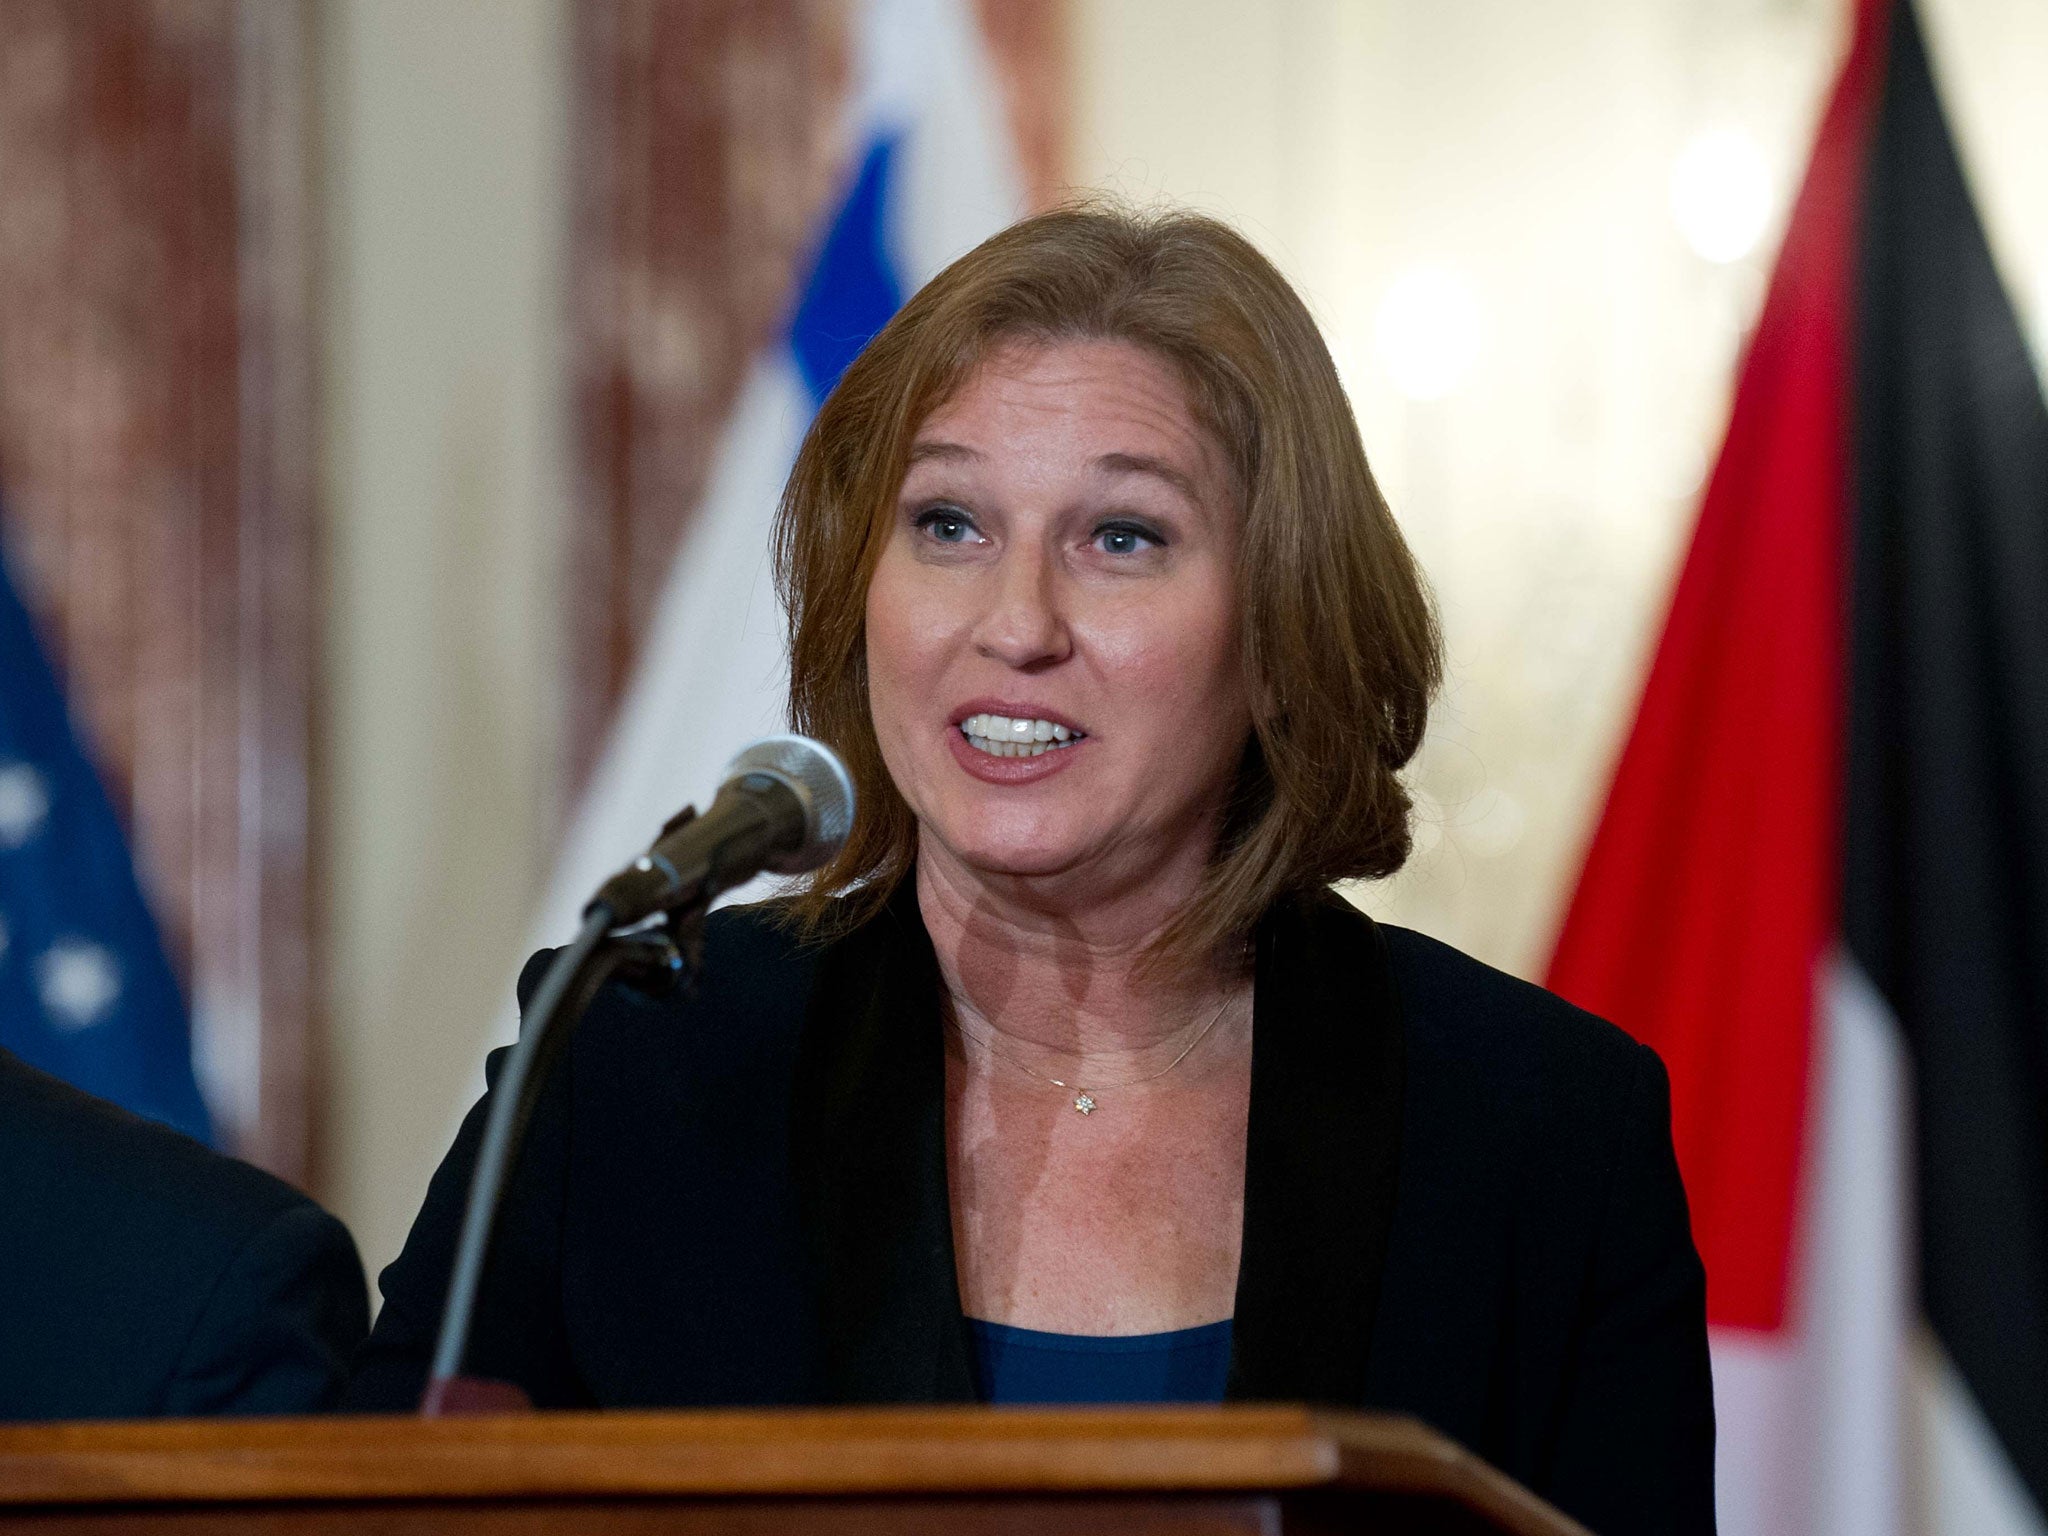 Tzipi Livni, the Israeli justice minister and chief negotiator in the peace talks abstained from the vote, but is understood to have attacked the decision during the cabinet meeting